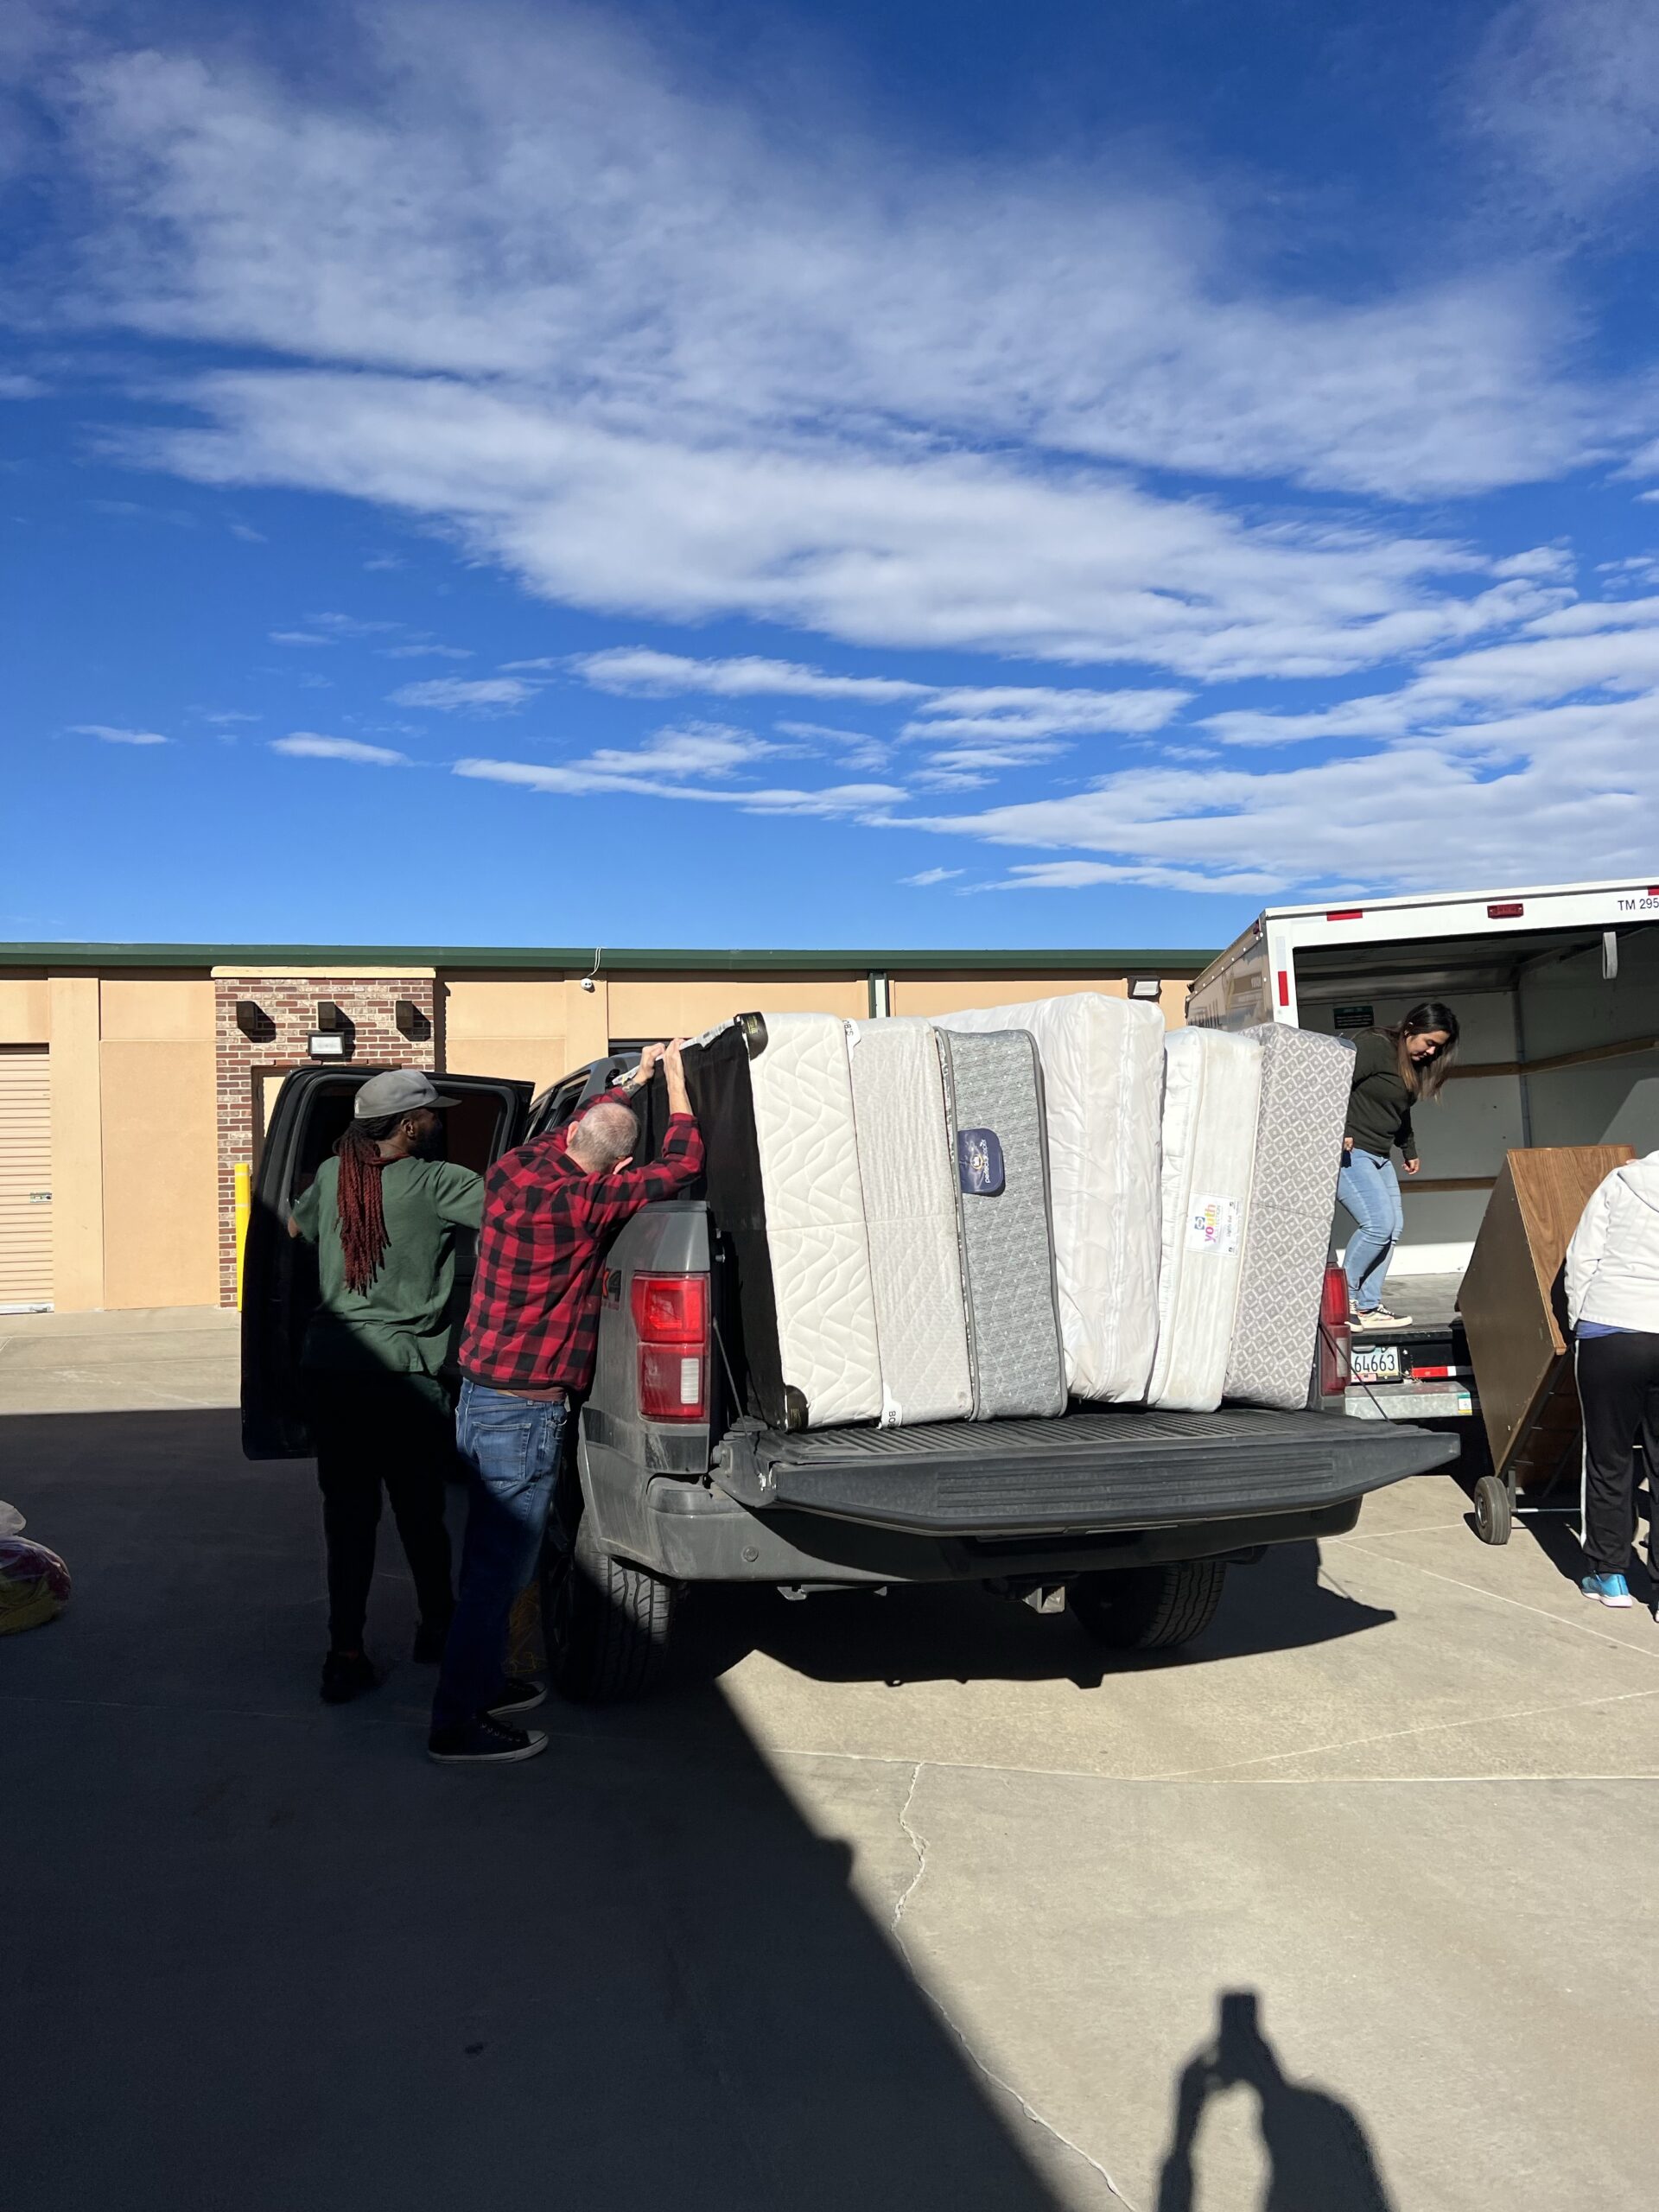 A man and woman loading mattresses into the back of a truck.